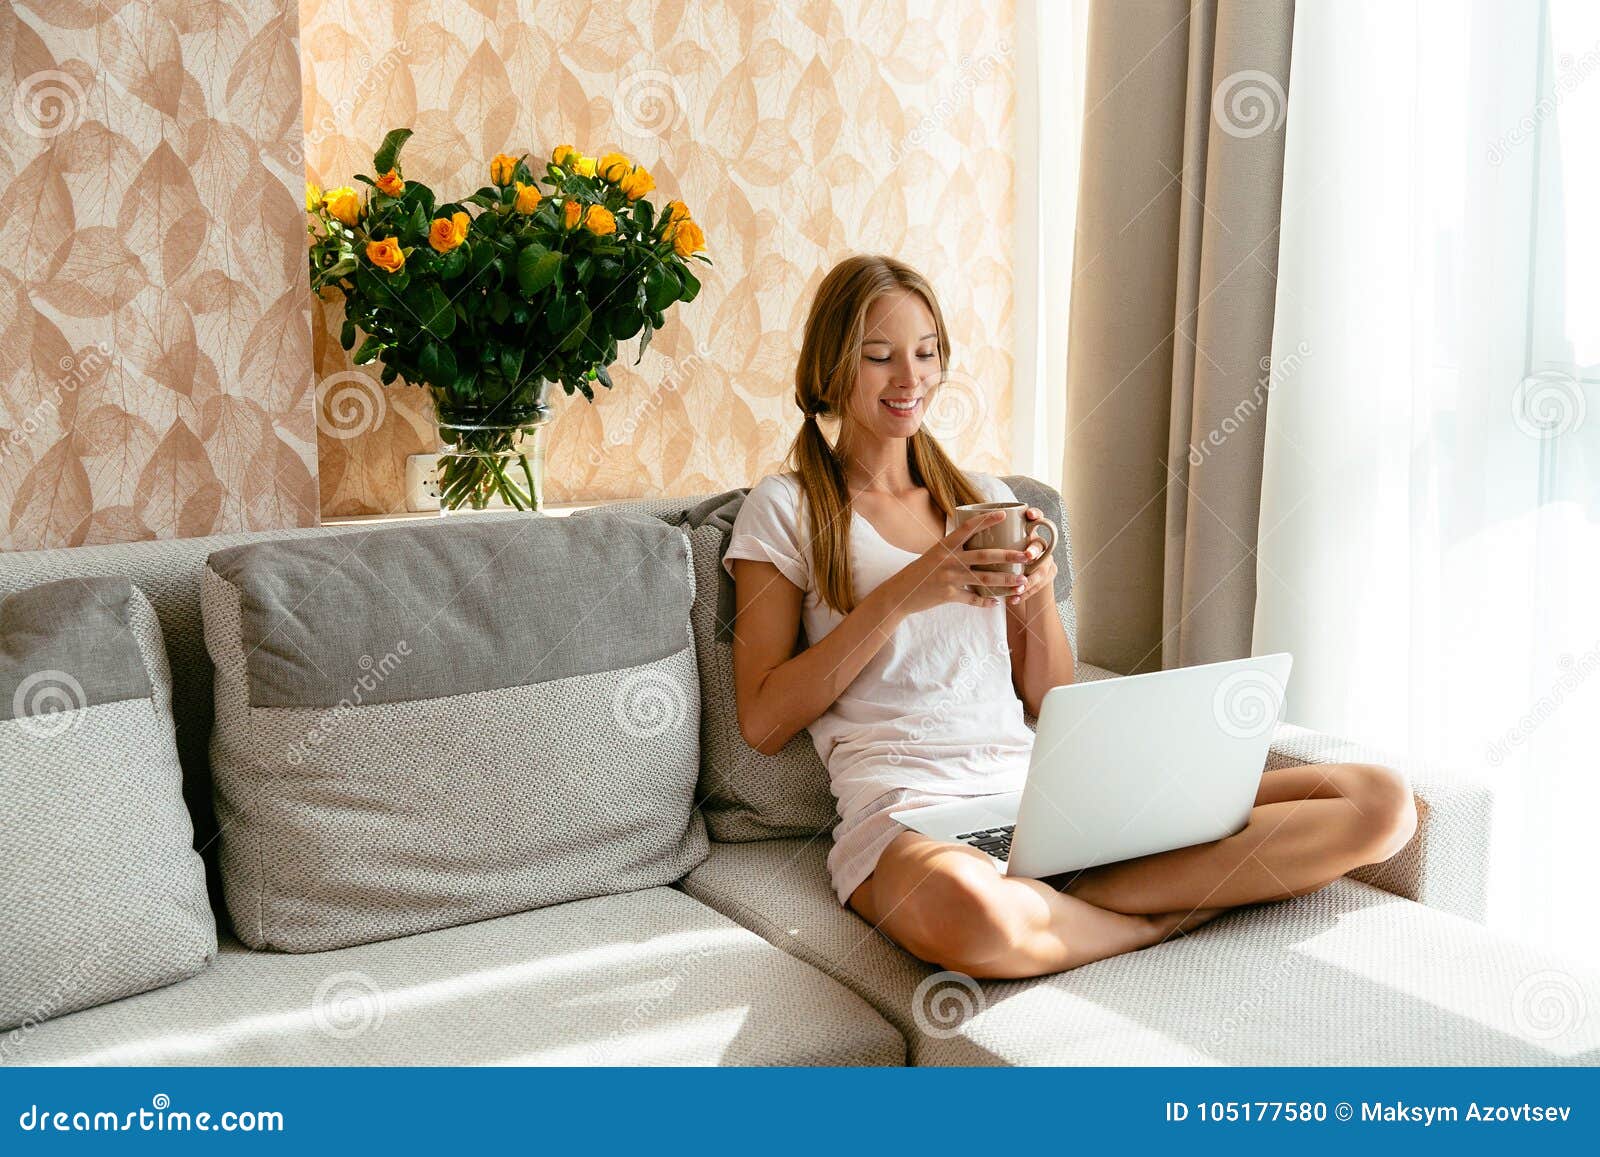 woman with cup of tea watching movie on laptop at home